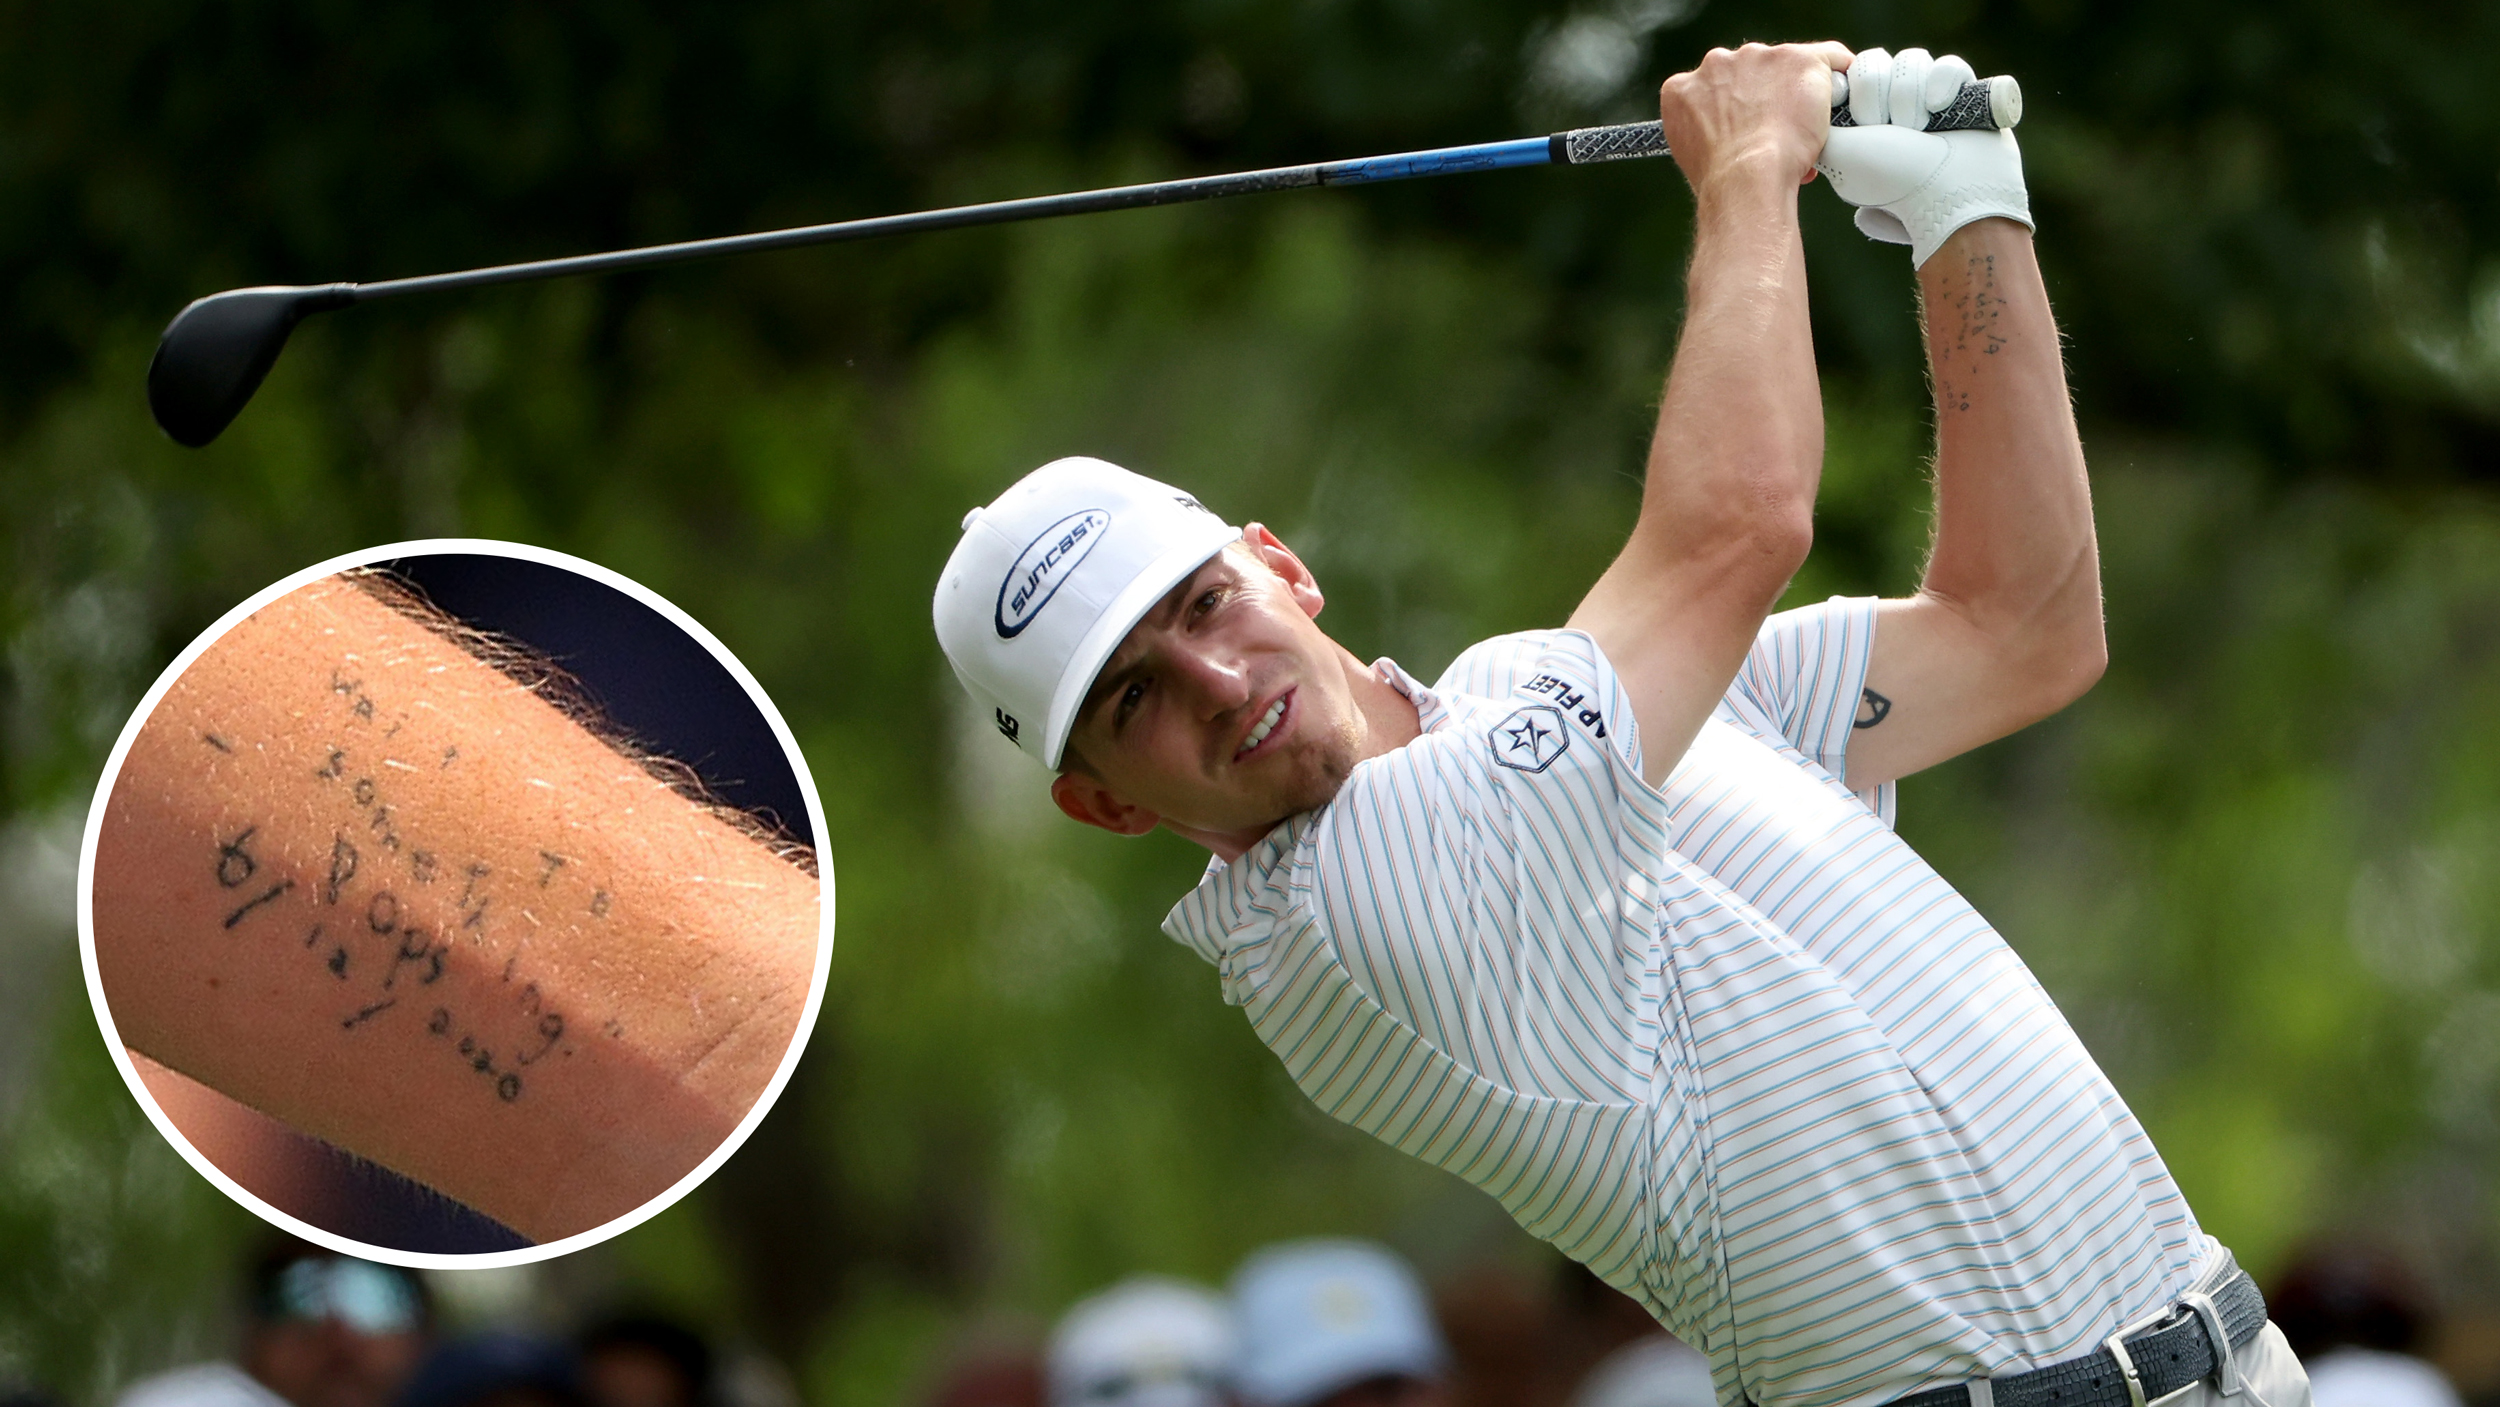 Golfer Sam Bennett Has a Tattoo With His Late Dad's Words